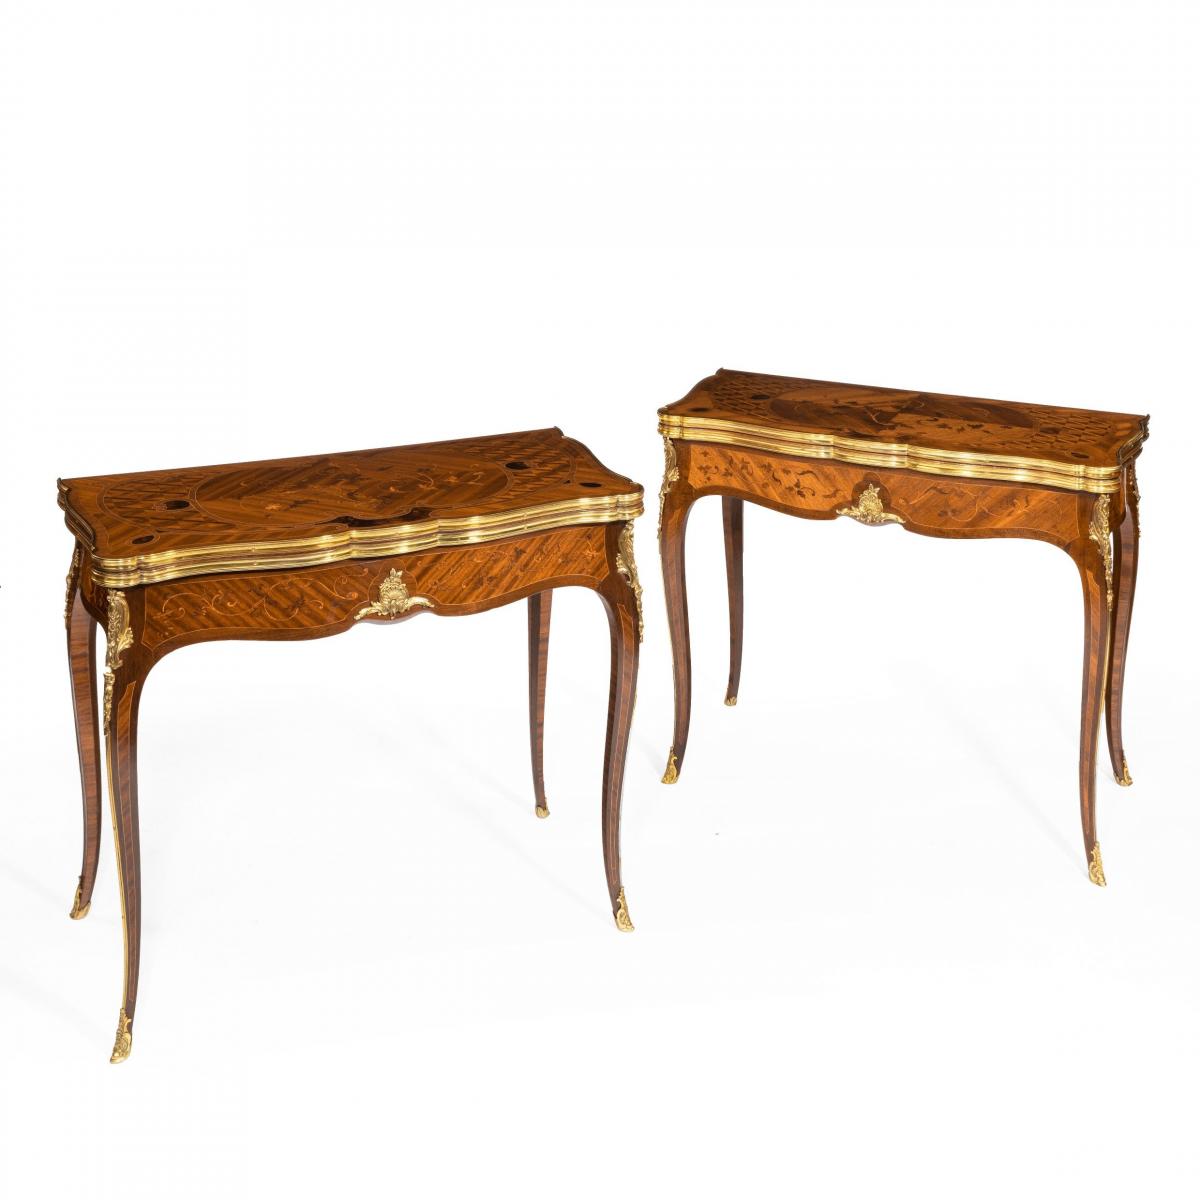 A pair of kingwood card tables by G. Durand